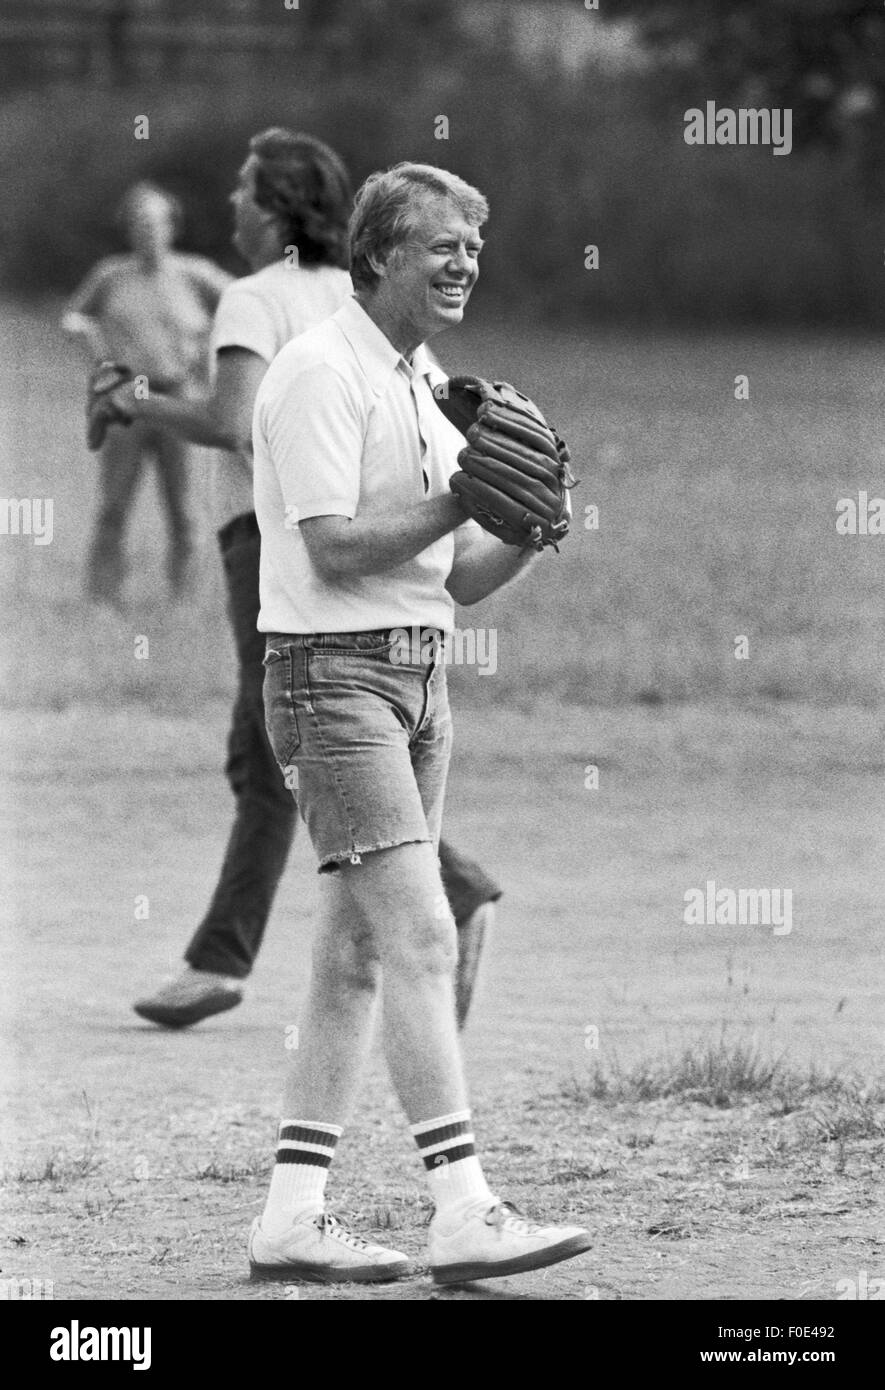 Plains, Georgia, USA. 7th Mar, 2014. Jimmy Carter plays softball in his hometown of Plains, Georgia. Carter was pitcher and captain of his team that was comprised of off duty U.S. Secret Service agents and White House staffers. The opposing team was comprised of members of the White house traveling press and captained by Billy Carter, the president's brother. © Ken Hawkins/ZUMA Wire/Alamy Live News Stock Photo